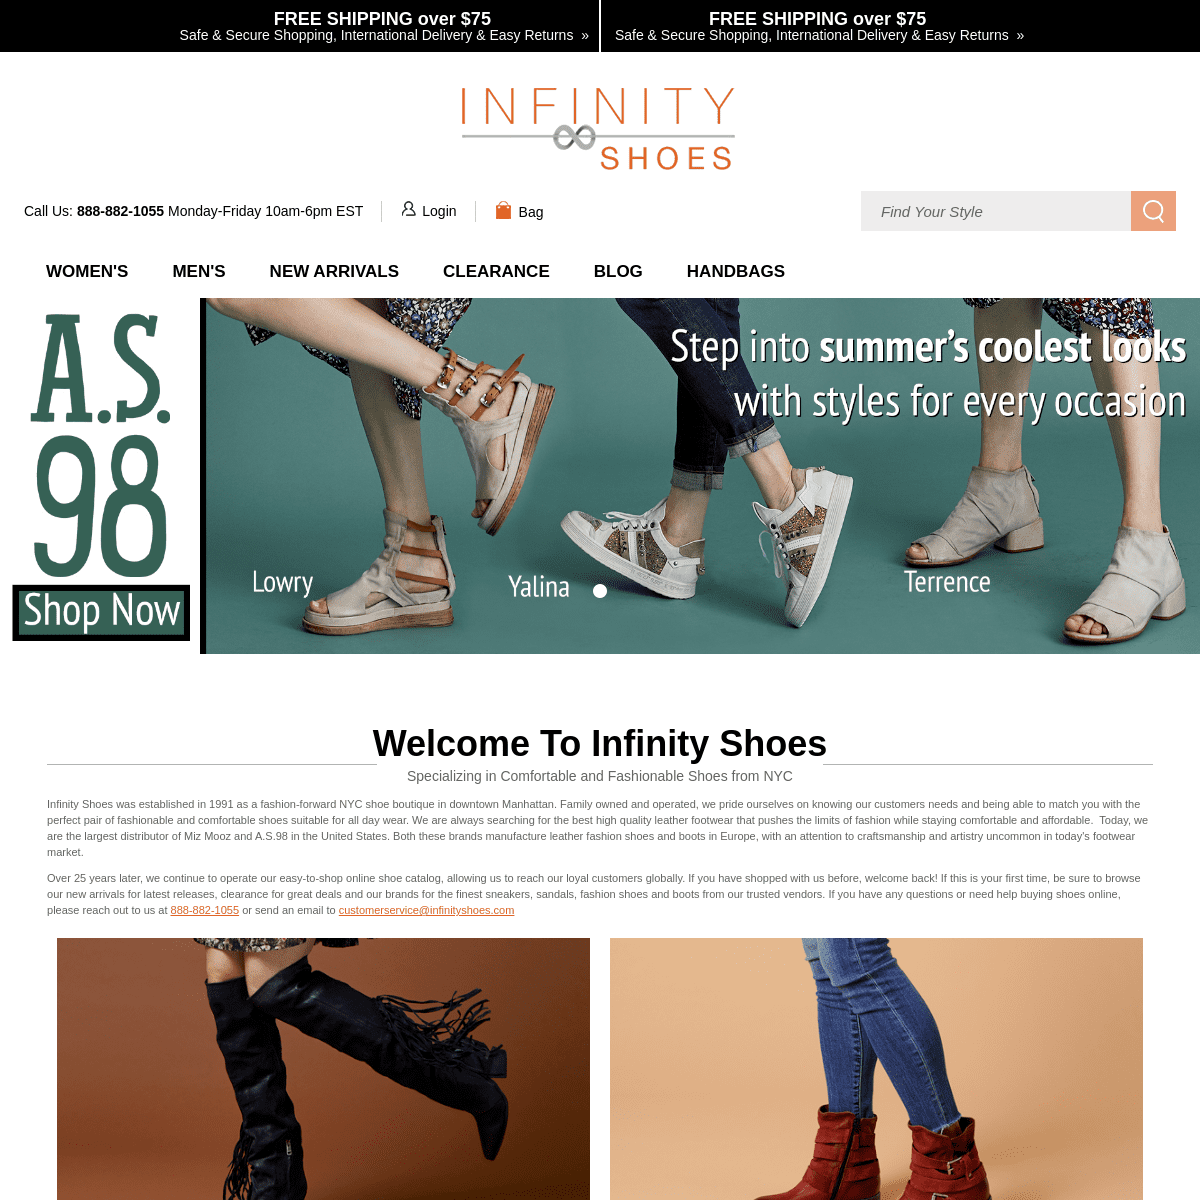 Buy Fashion Shoes and Boots Online - Infinity Shoes